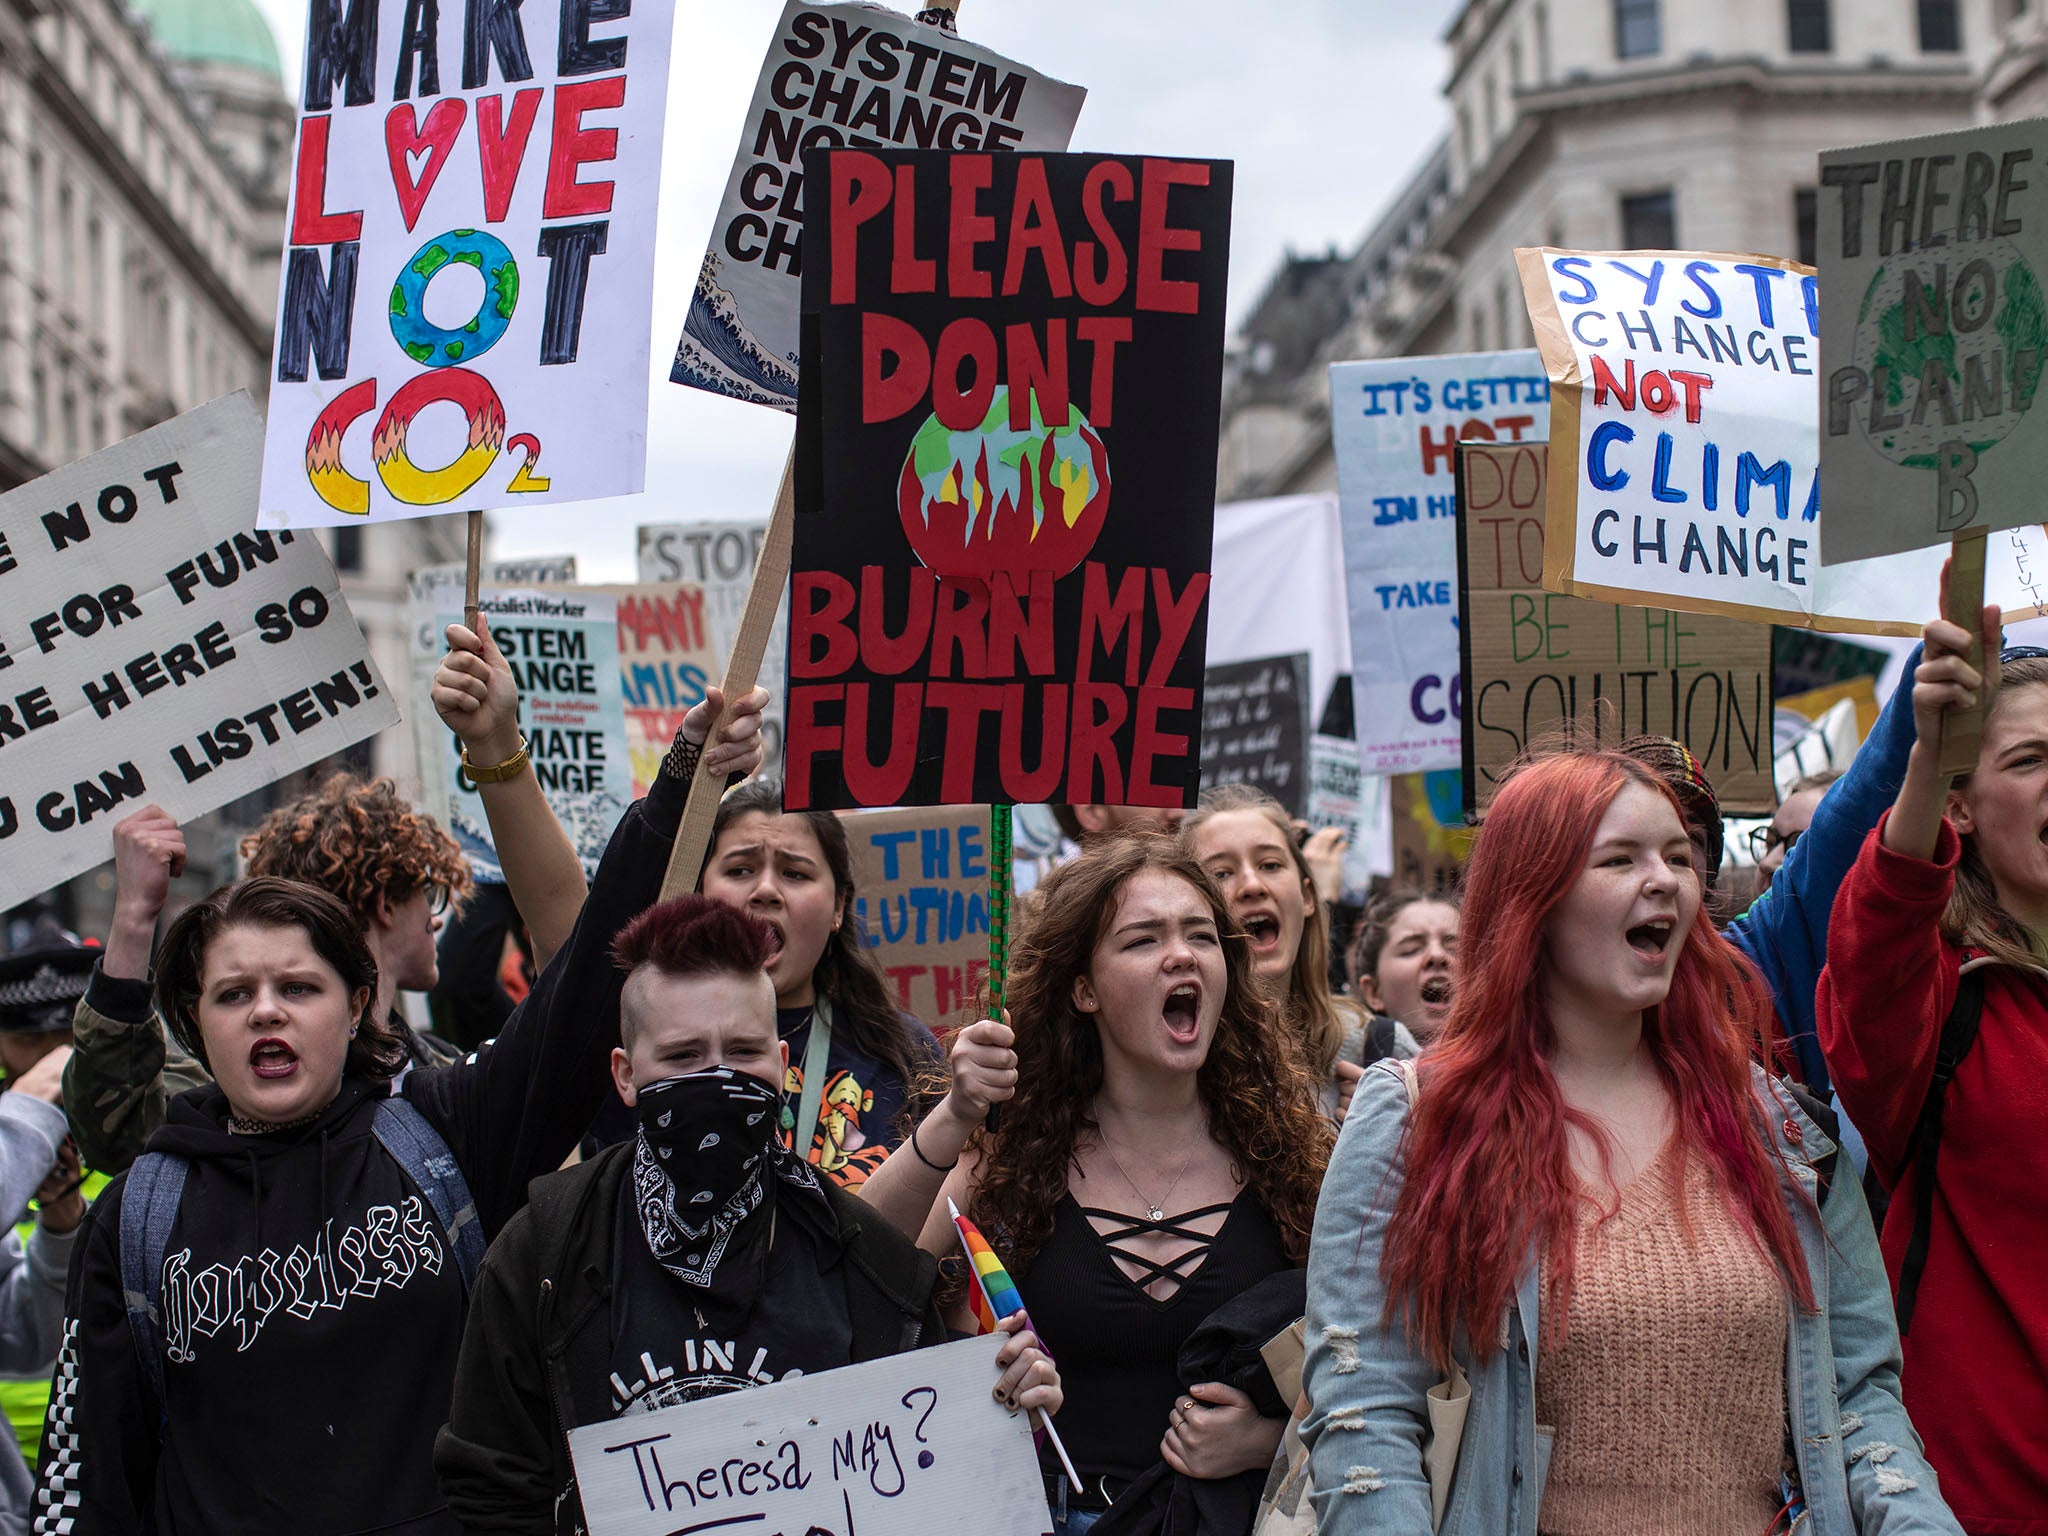 The YouthStrike4Climate student march in London earlier this month